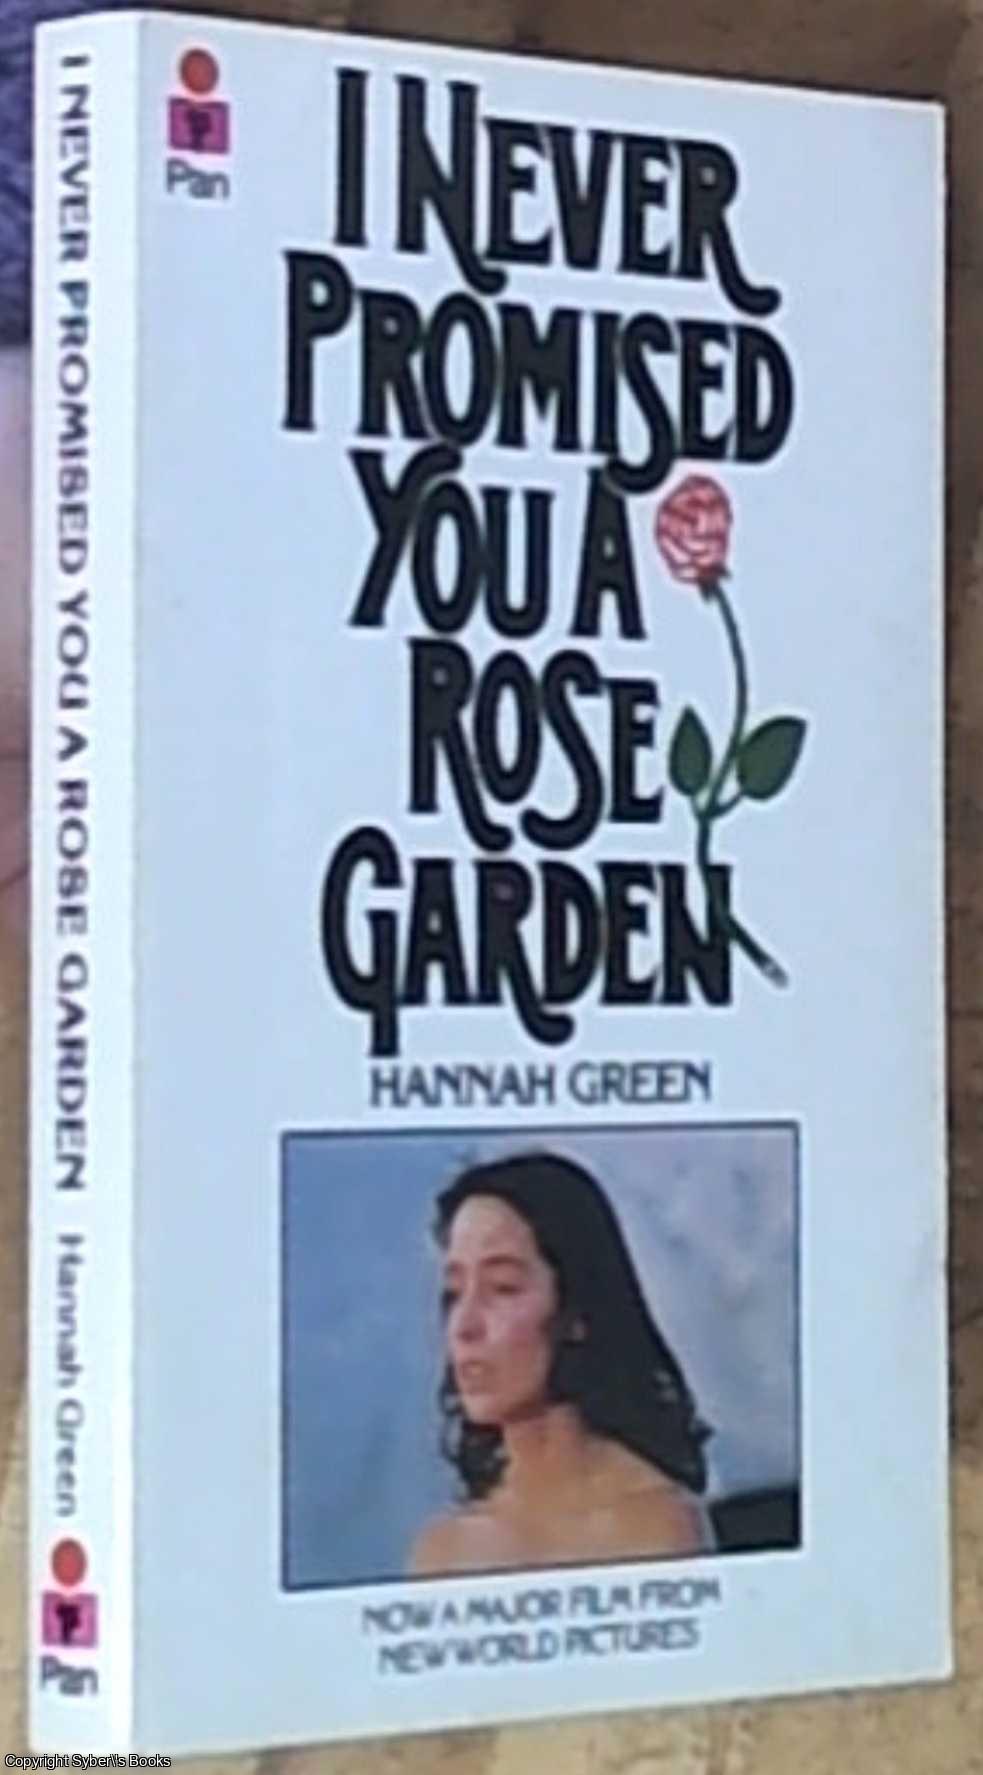 Green, Hannah - I Never Promised You a Rose Garden